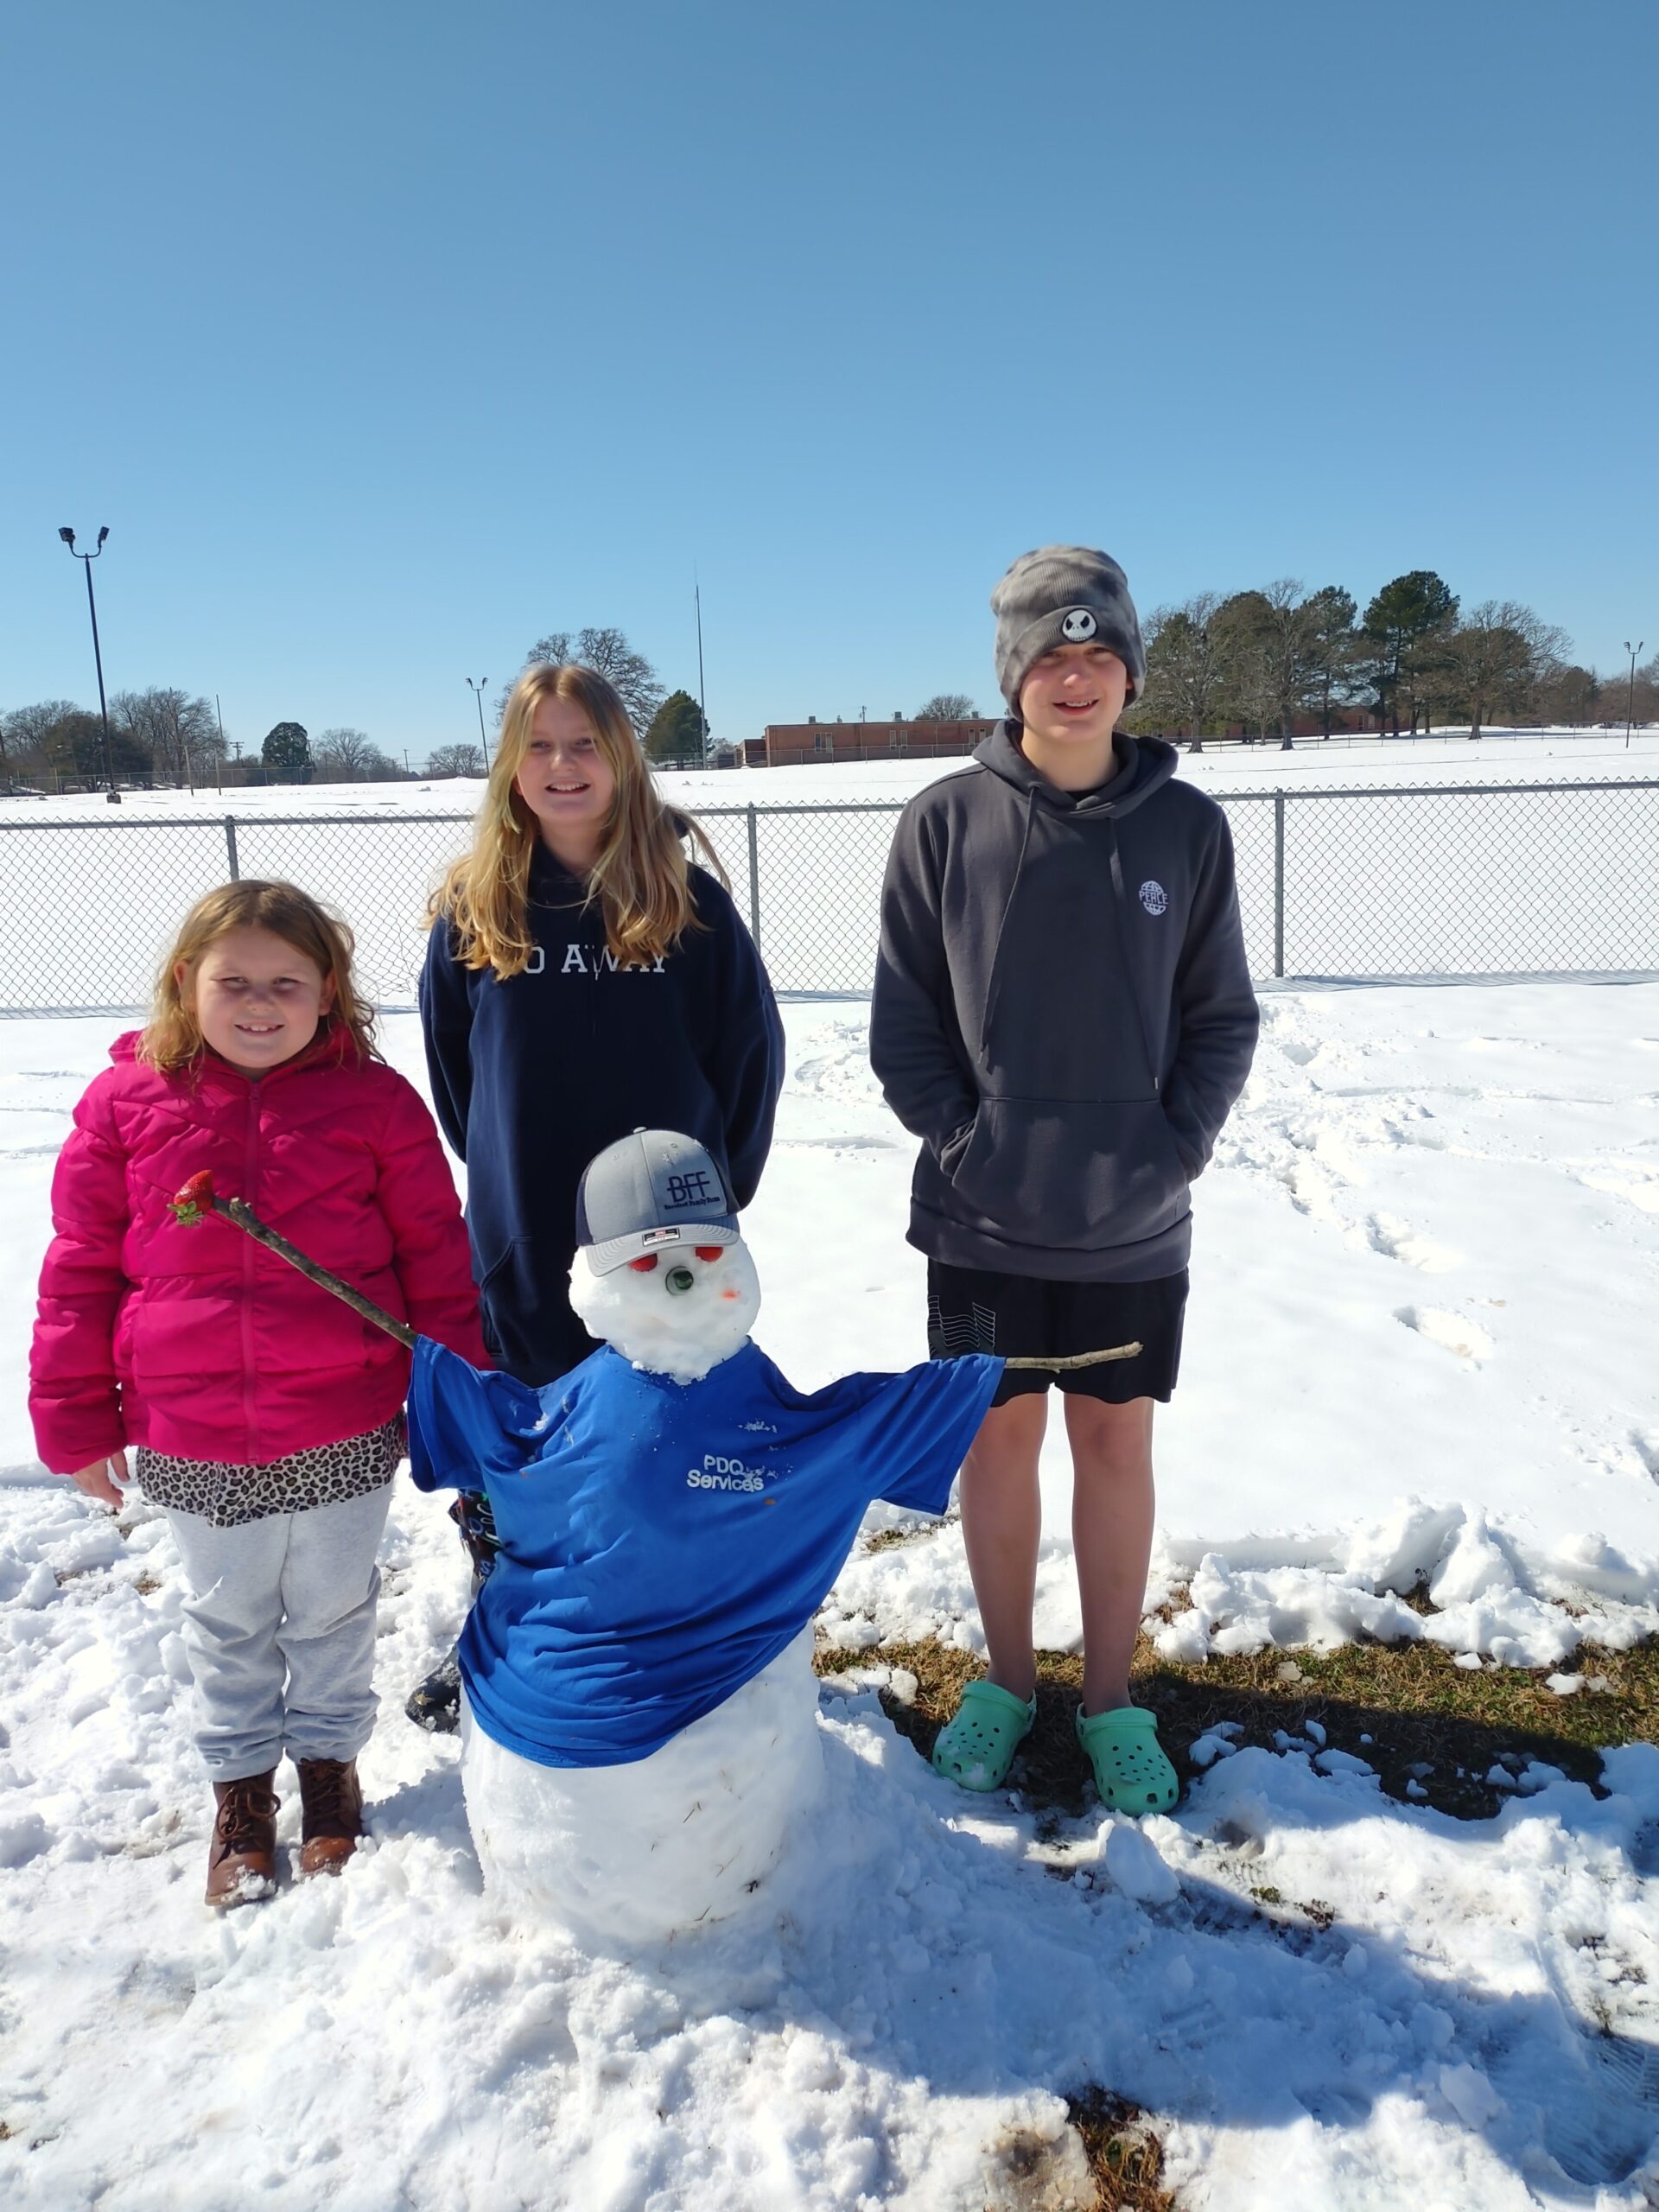 Local Family Makes Snowman to Honor Late Father/Grandfather